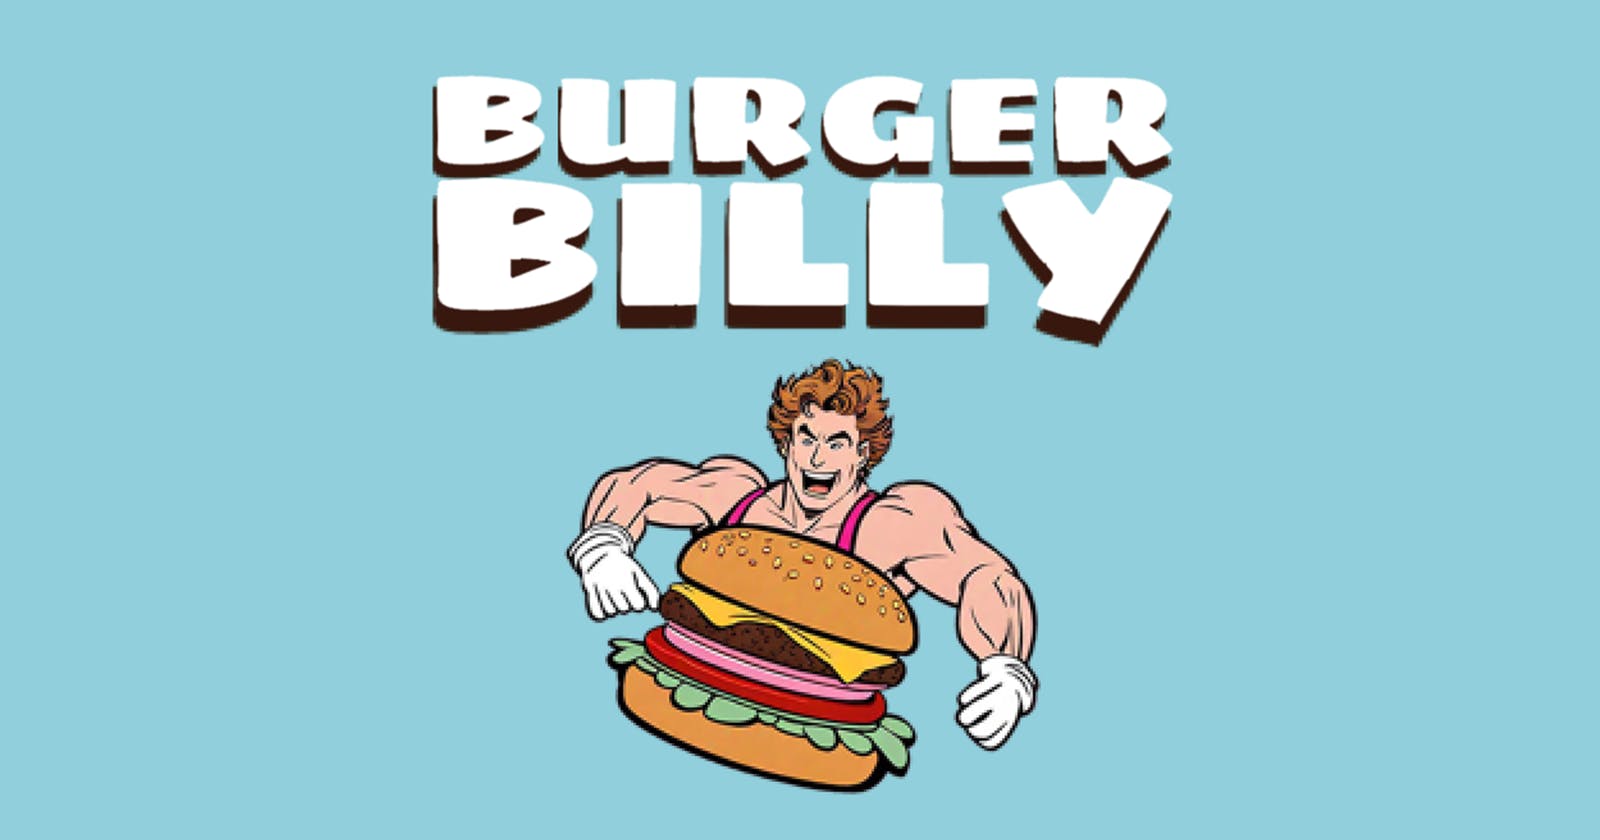 Burger Billy (a spelling-aid video game for kids)